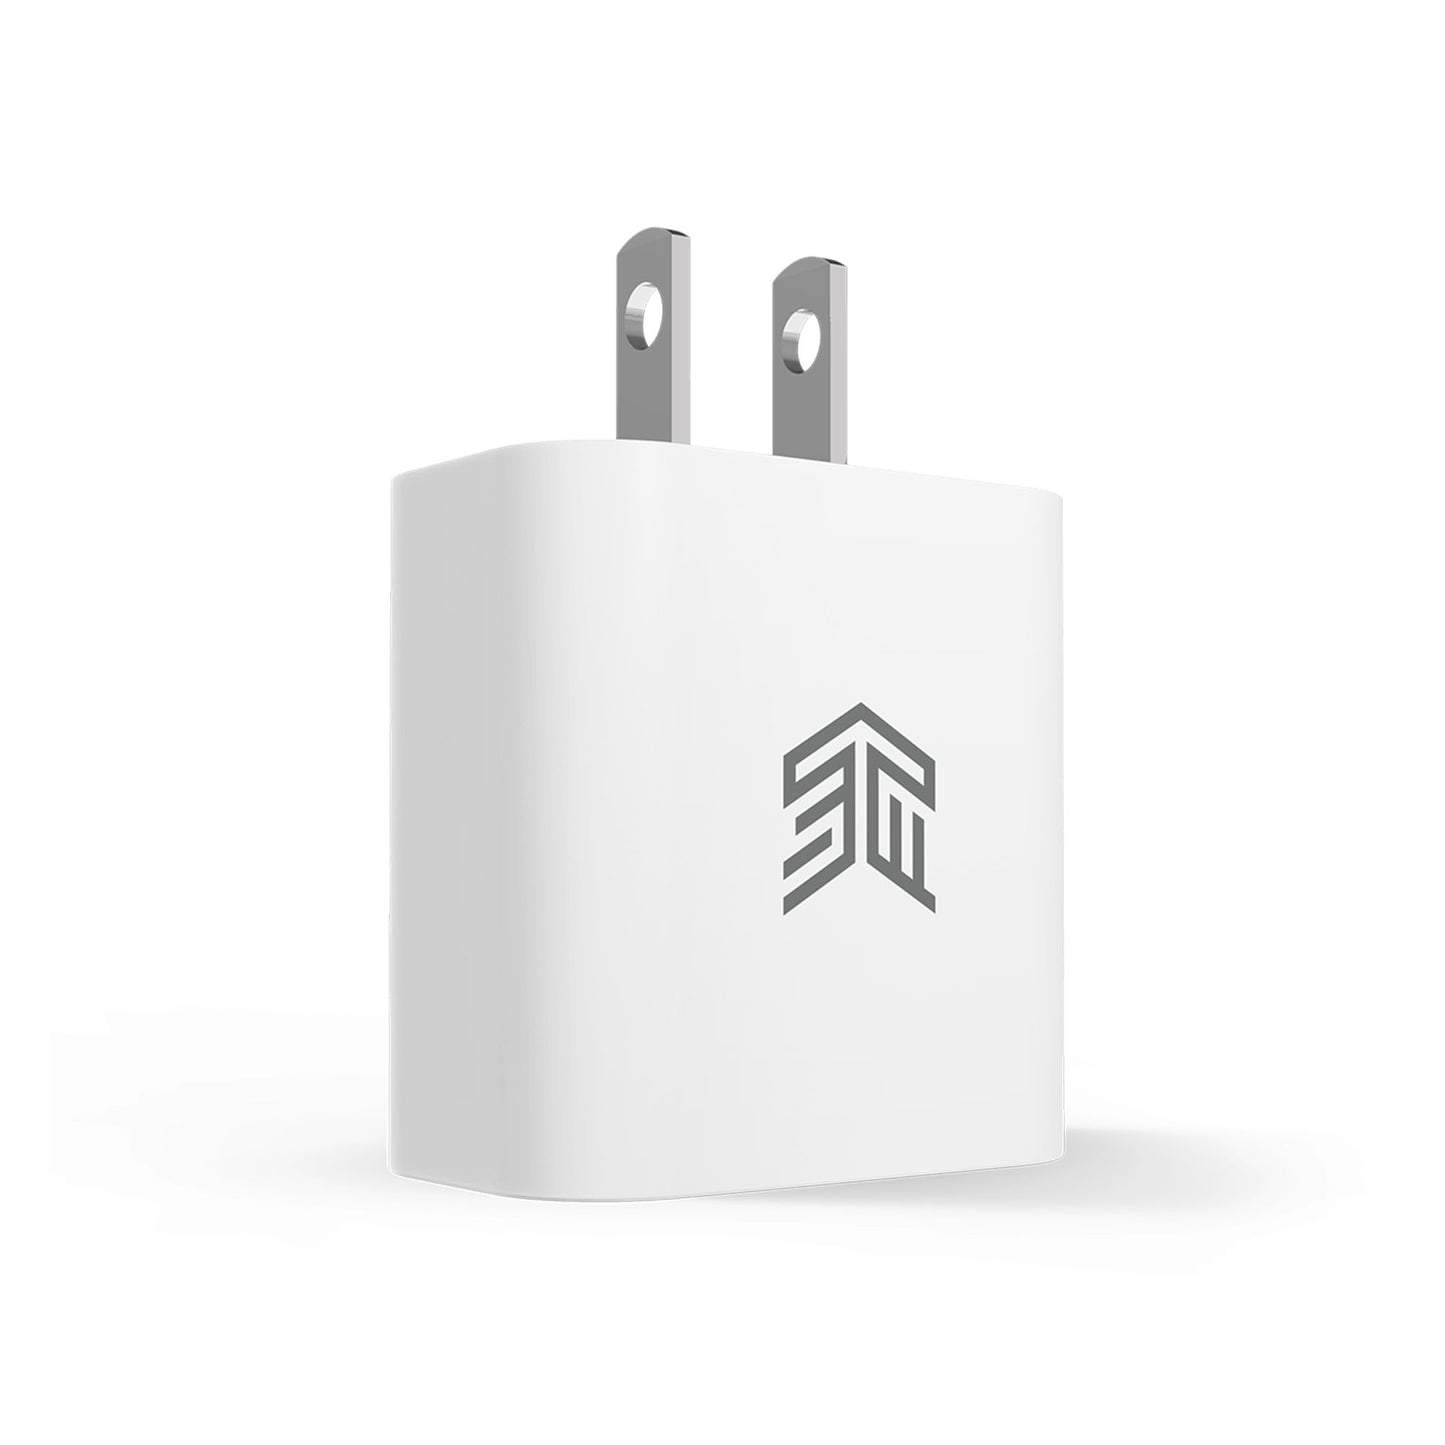 STM PowerAdapter 20W USB-C Wall Charger - White